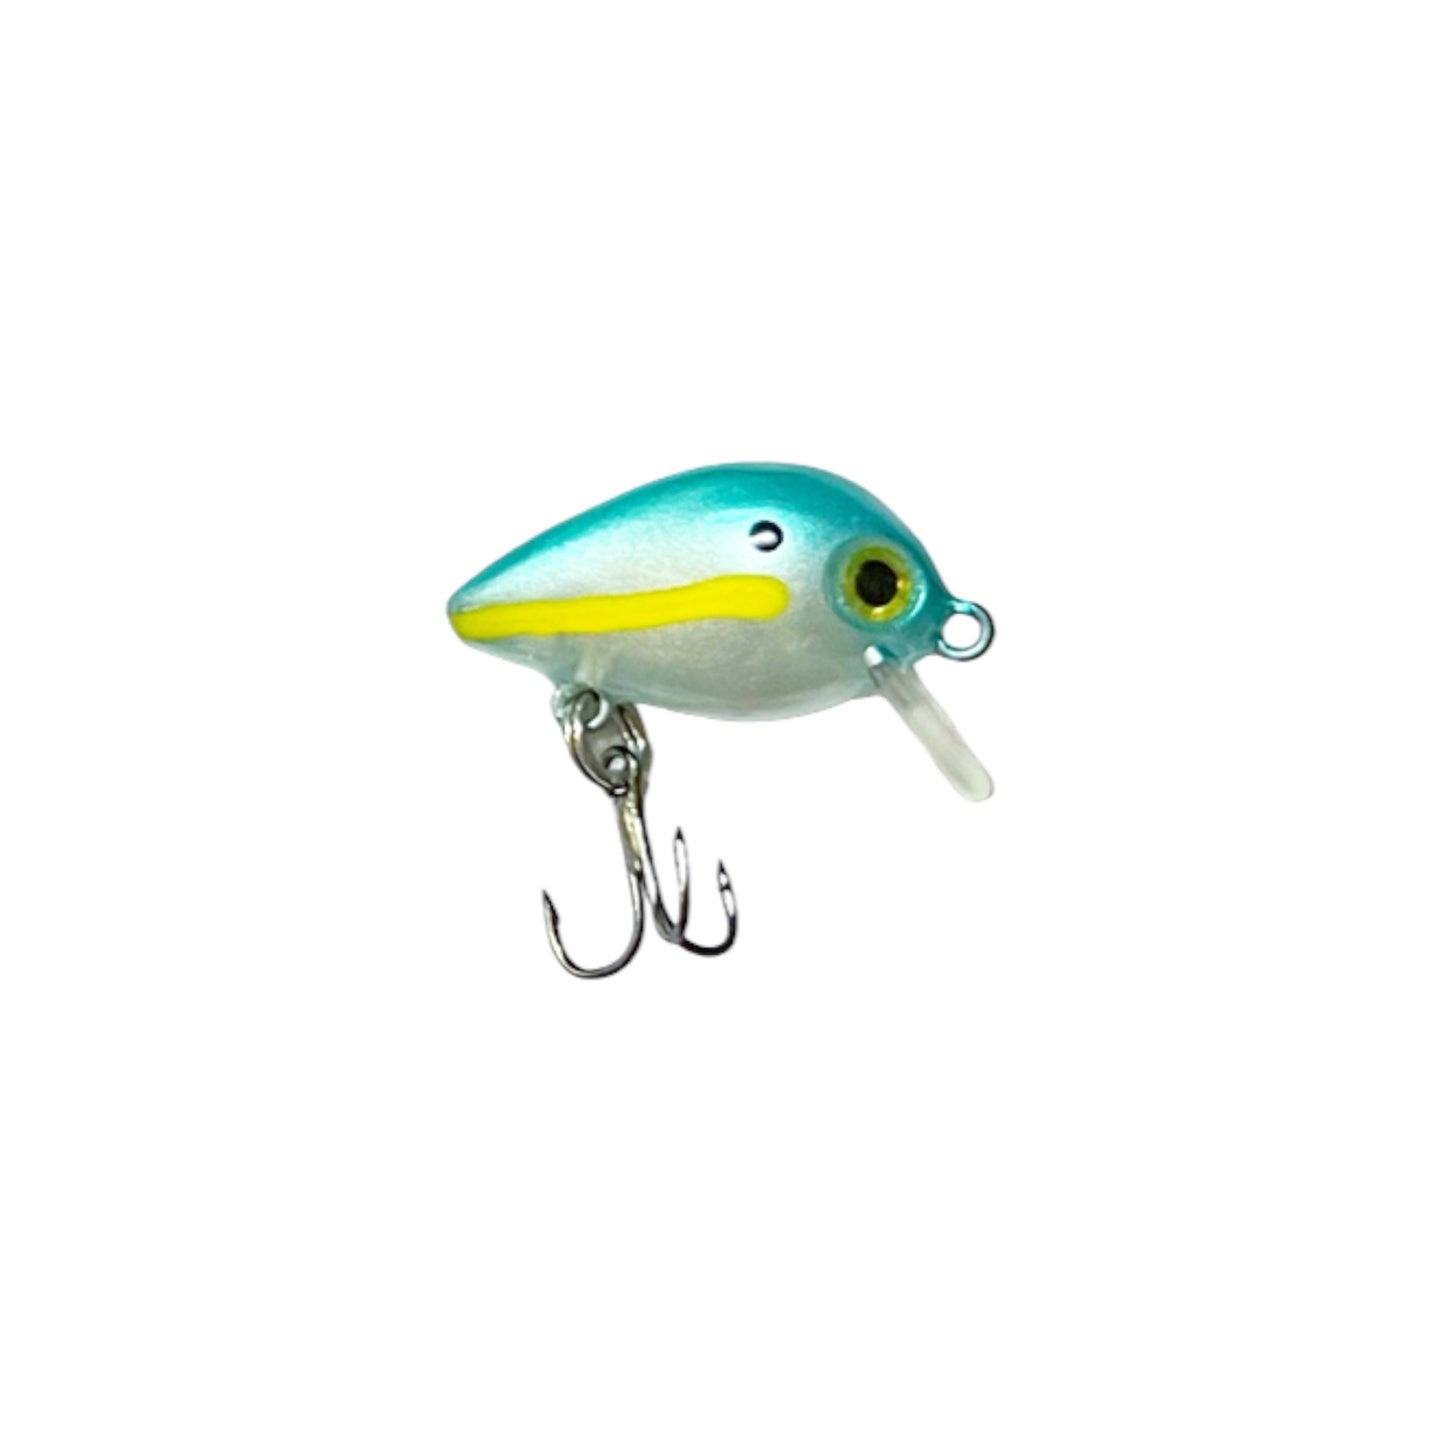 Micro panfish crankbait with bill in sexy shad pattern with yellow eyes and one hook.